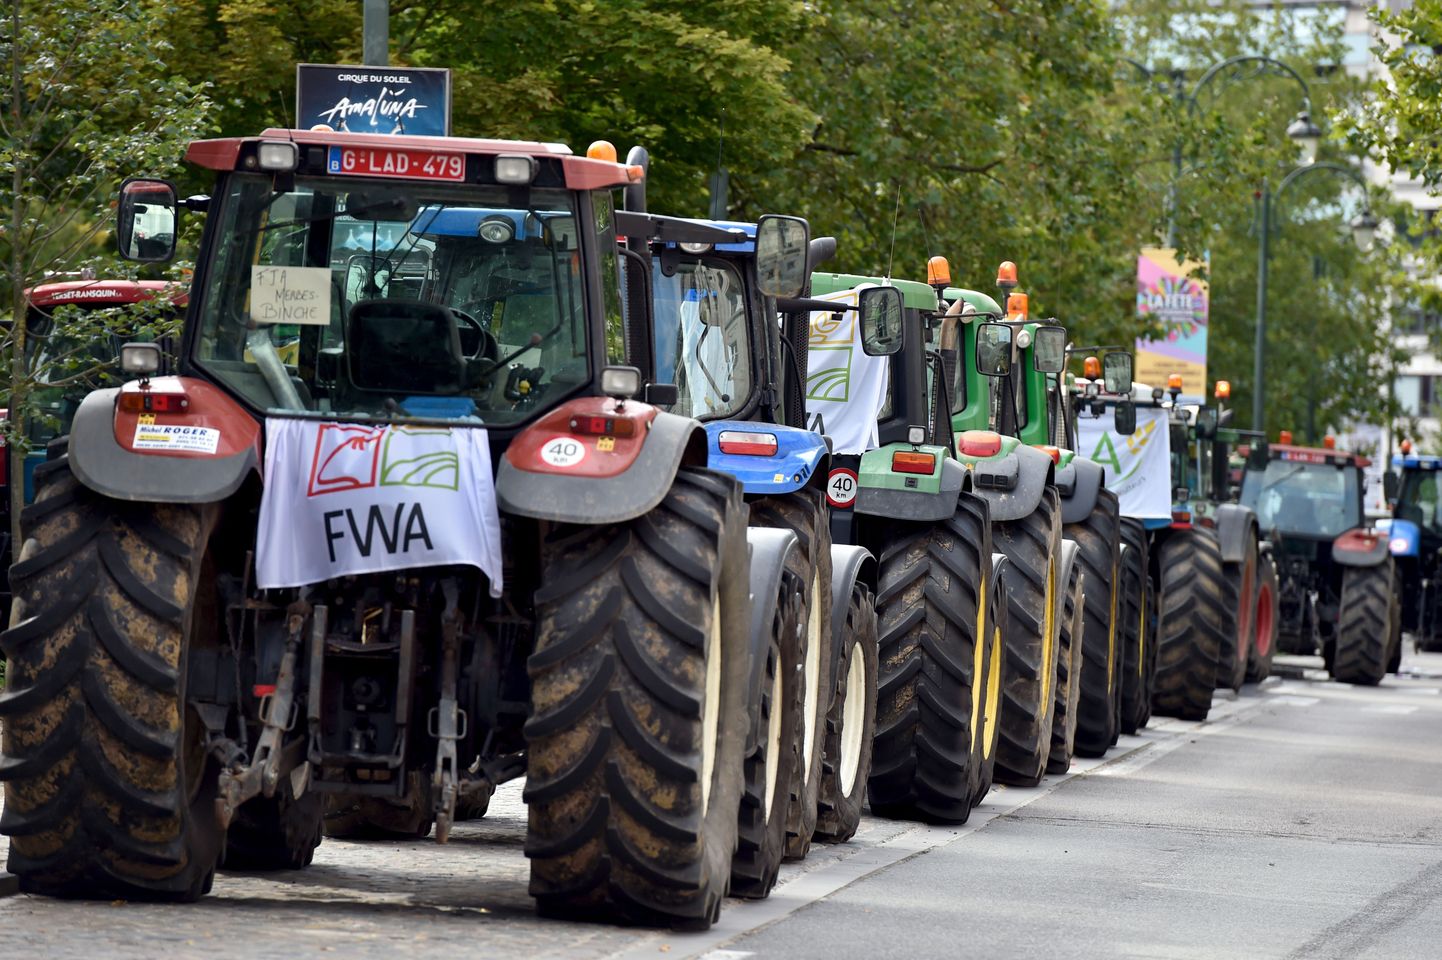 Tractors are seen in central Brussels as farmers and dairy farmers from all over Europe take part in a demonstration outside a European Union farm ministers' emergency meeting at the EU Council headquarters in Brussels, Belgium September 7, 2015. Thousands of farmers gathered in the European capital calling for more help with low prices and high costs. REUTERS/Eric Vidal